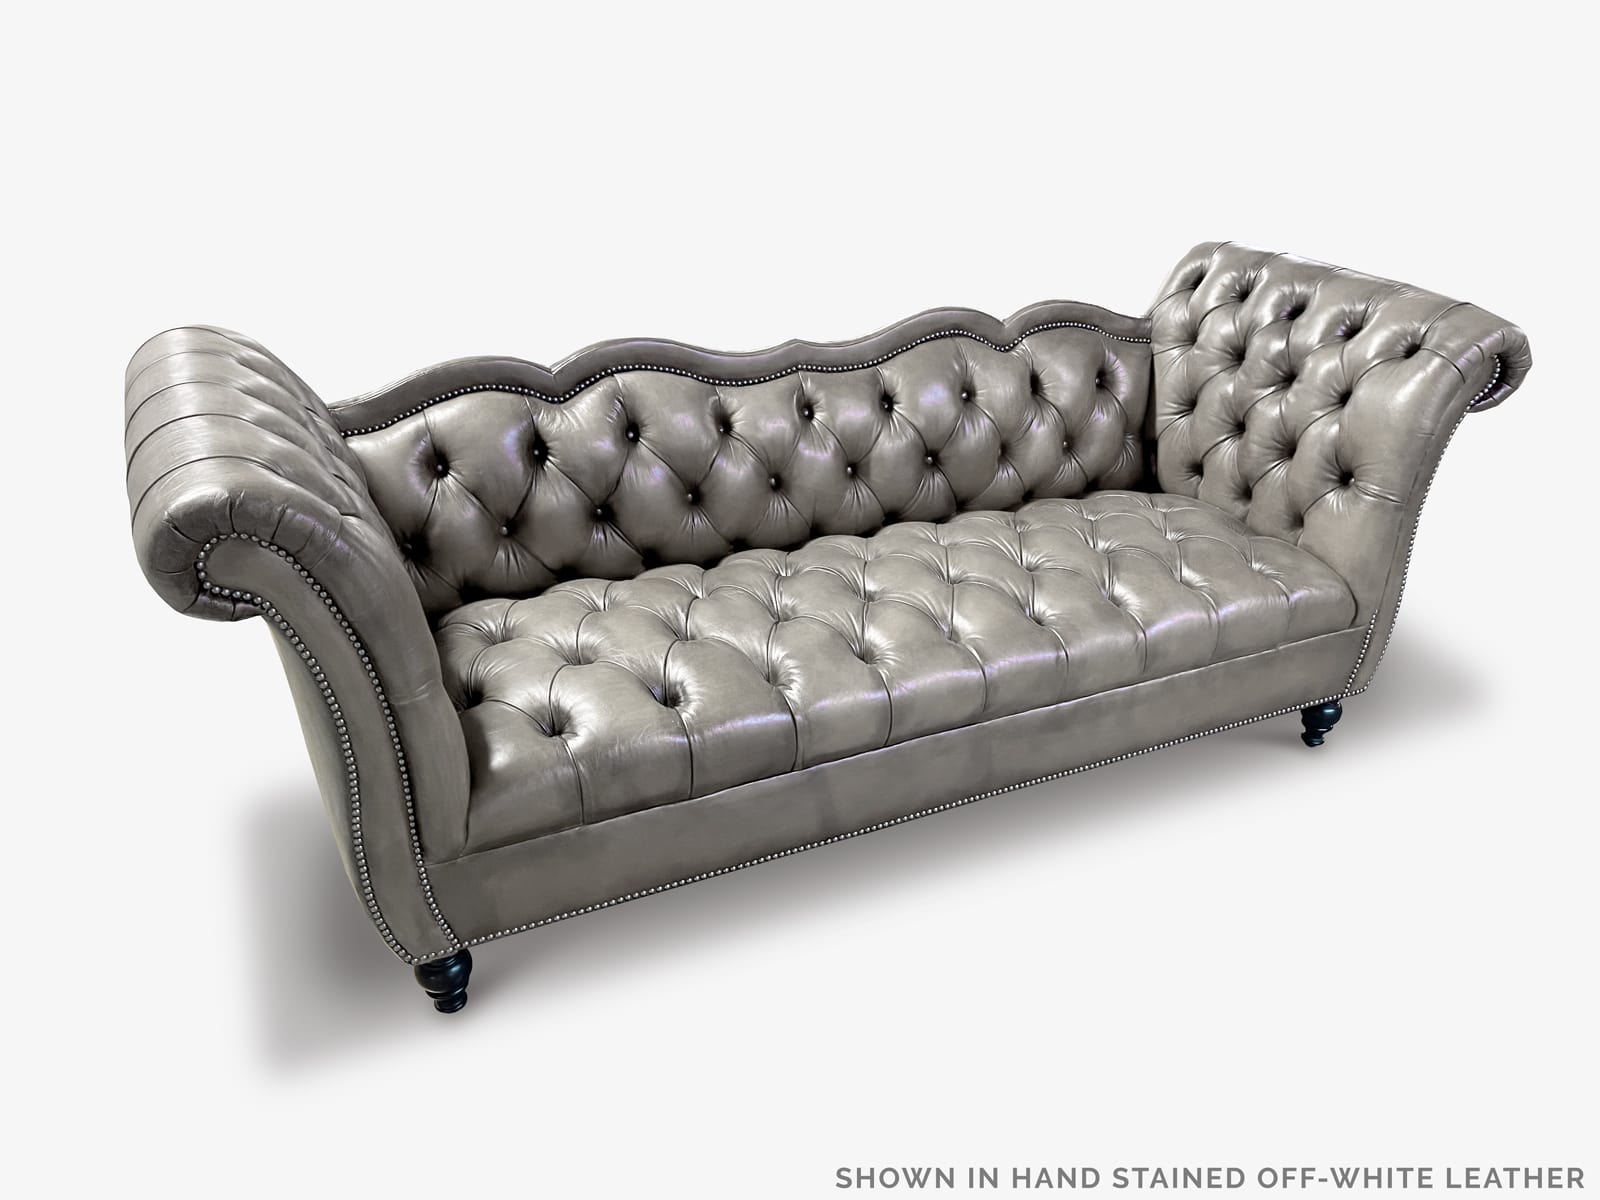 The Collins Custom Built Vintage Hand-Stained Off-White Chesterfield Sofa